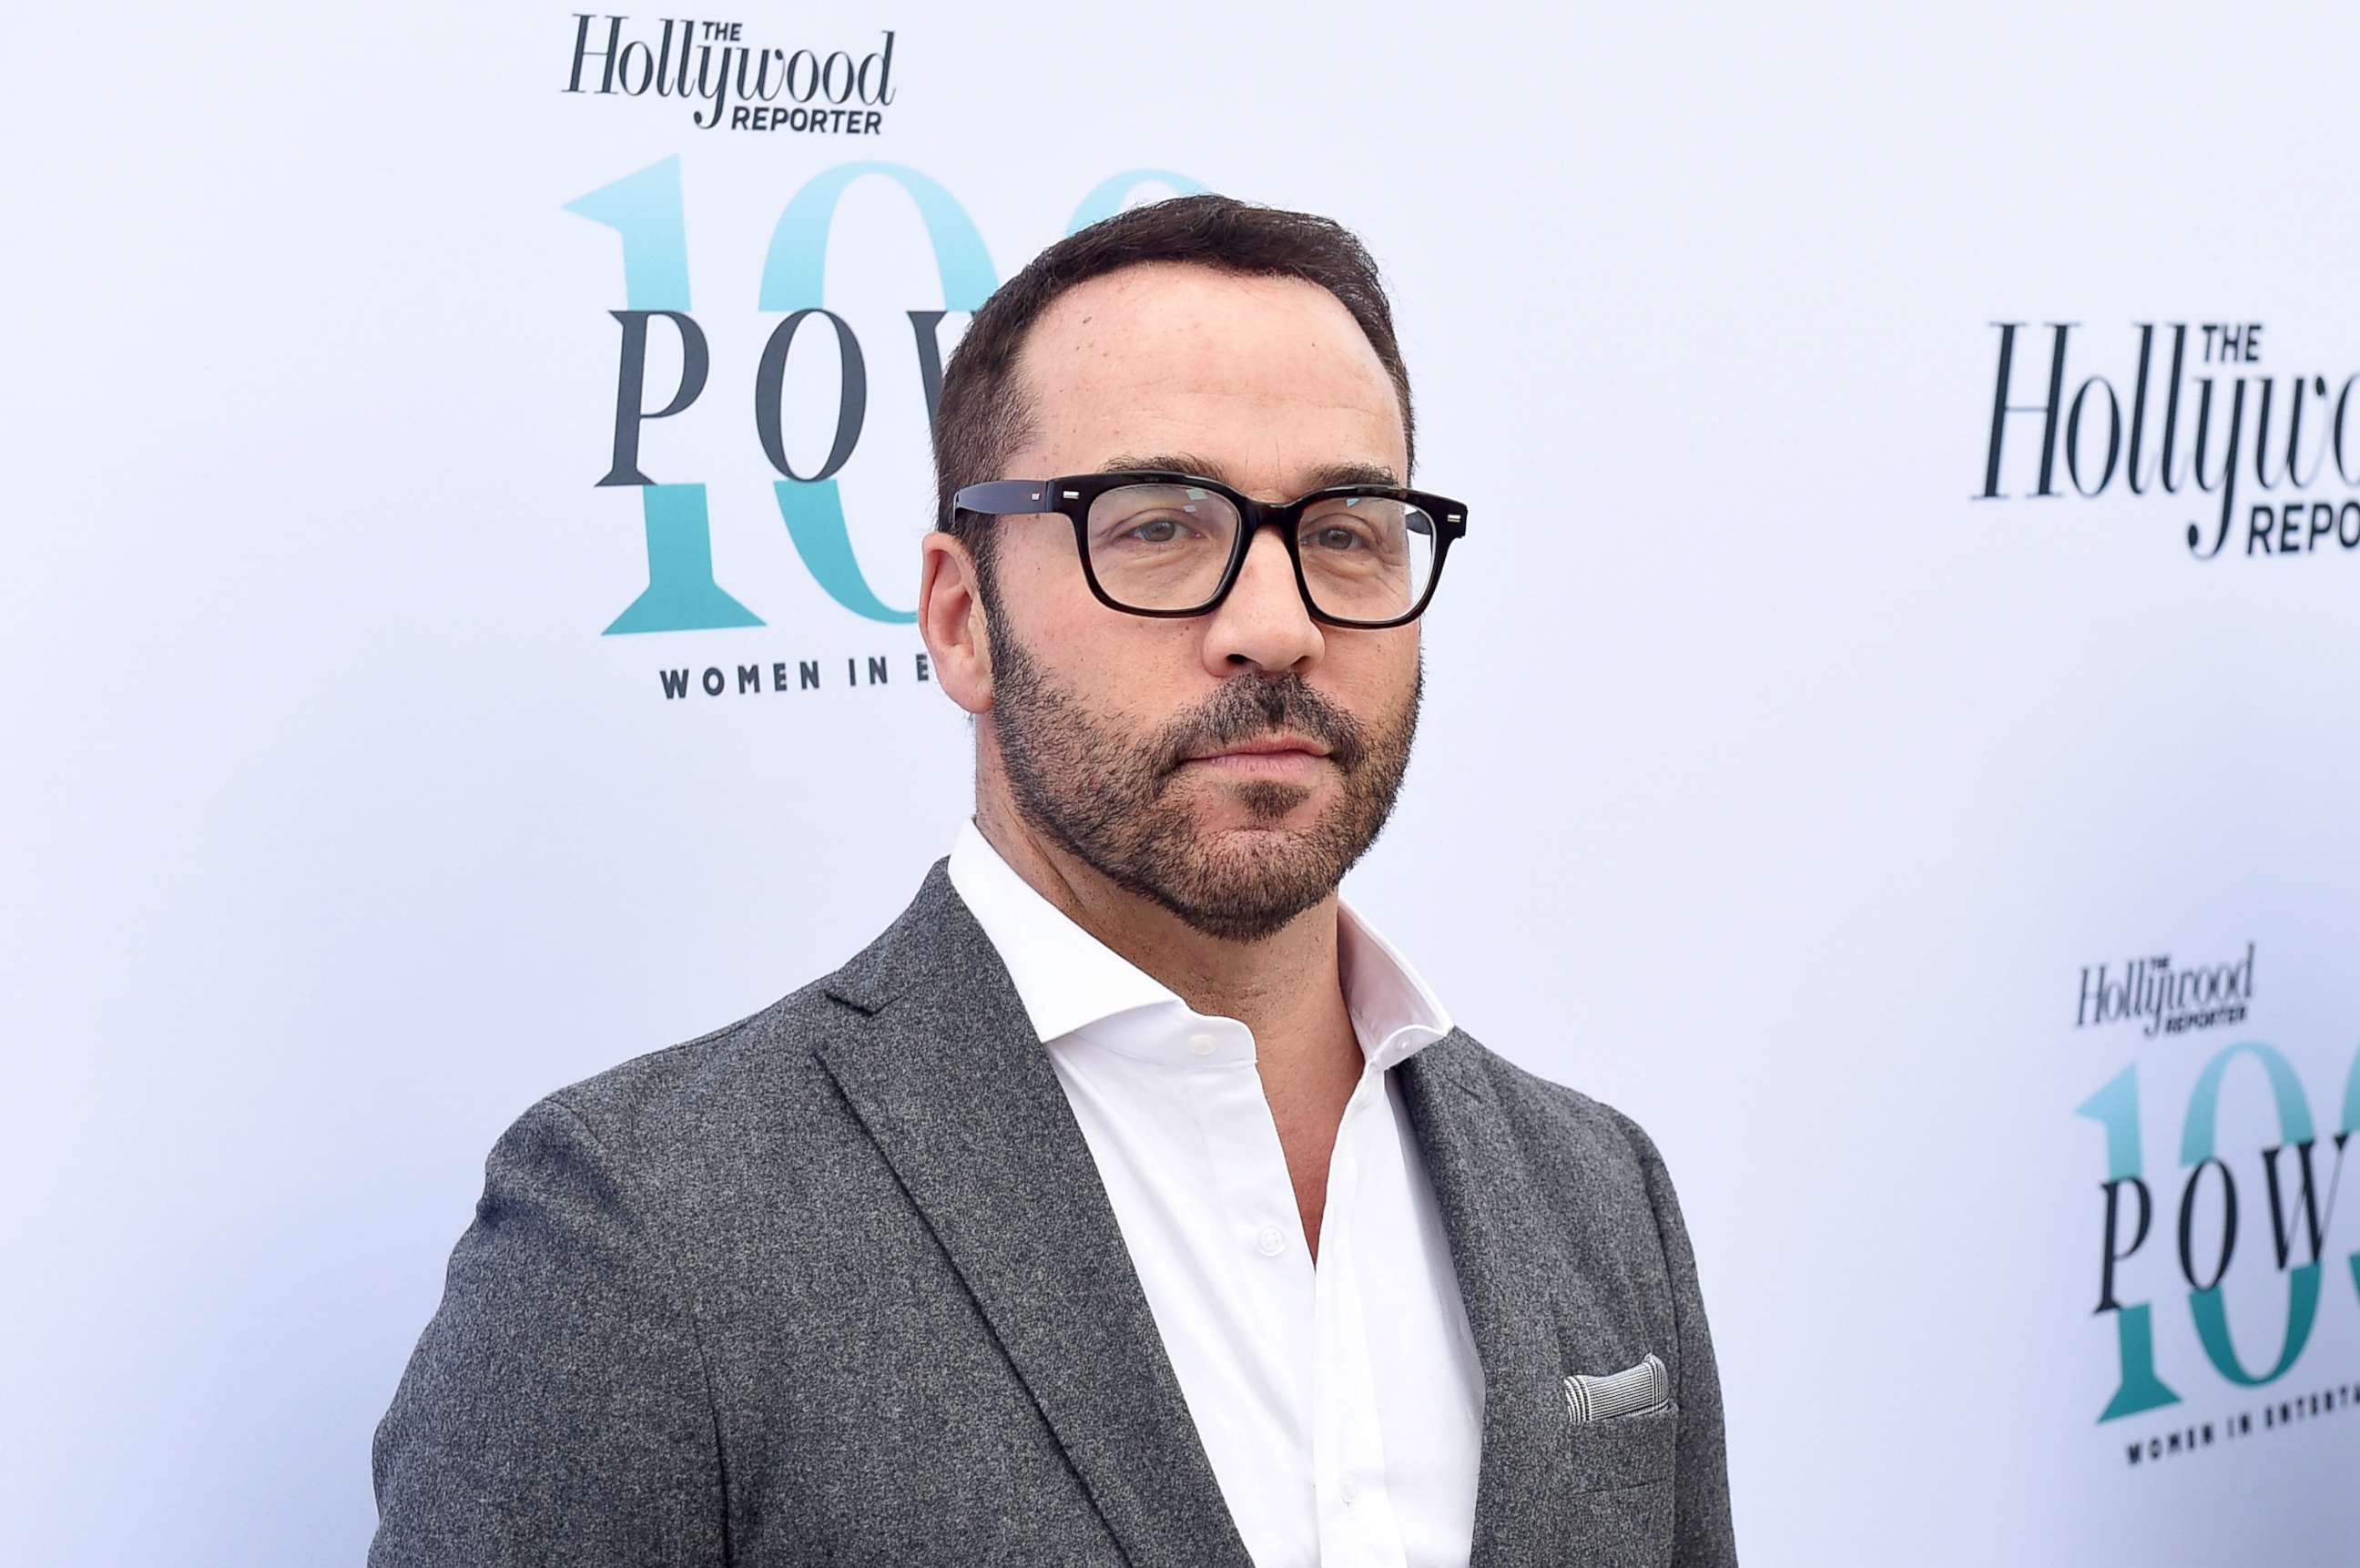 PHOTO: Jeremy Piven attends The Hollywood Reporter's Annual Women in Entertainment Breakfast in Los Angeles at Milk Studios, Dec. 7, 2016, in Hollywood, Calif.